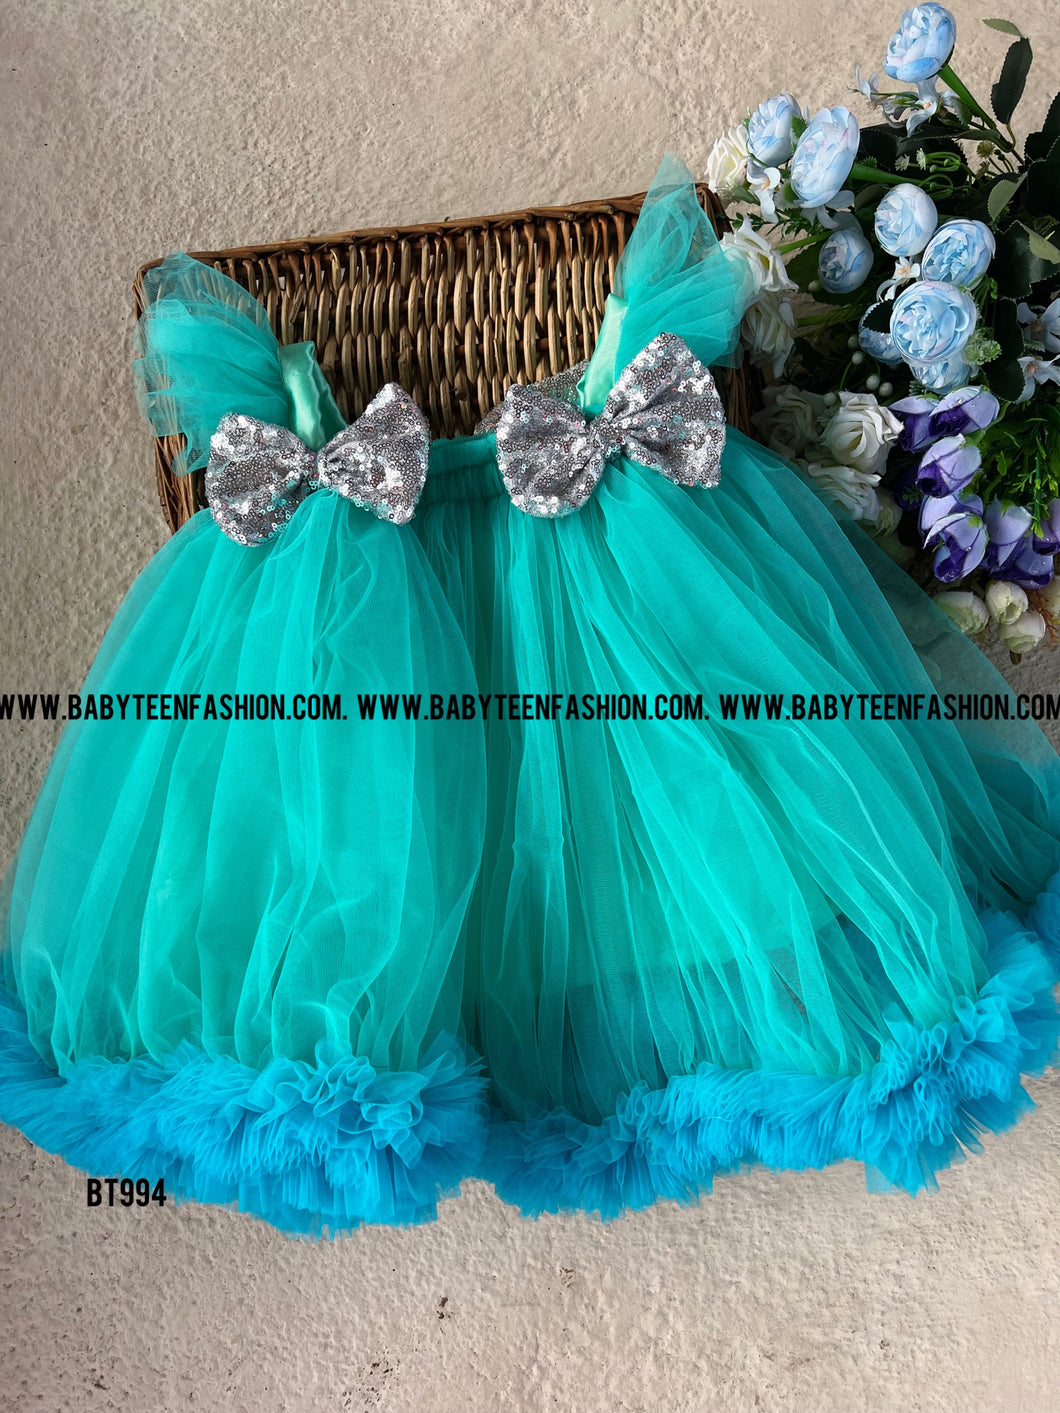 BT994 Double bow Frock